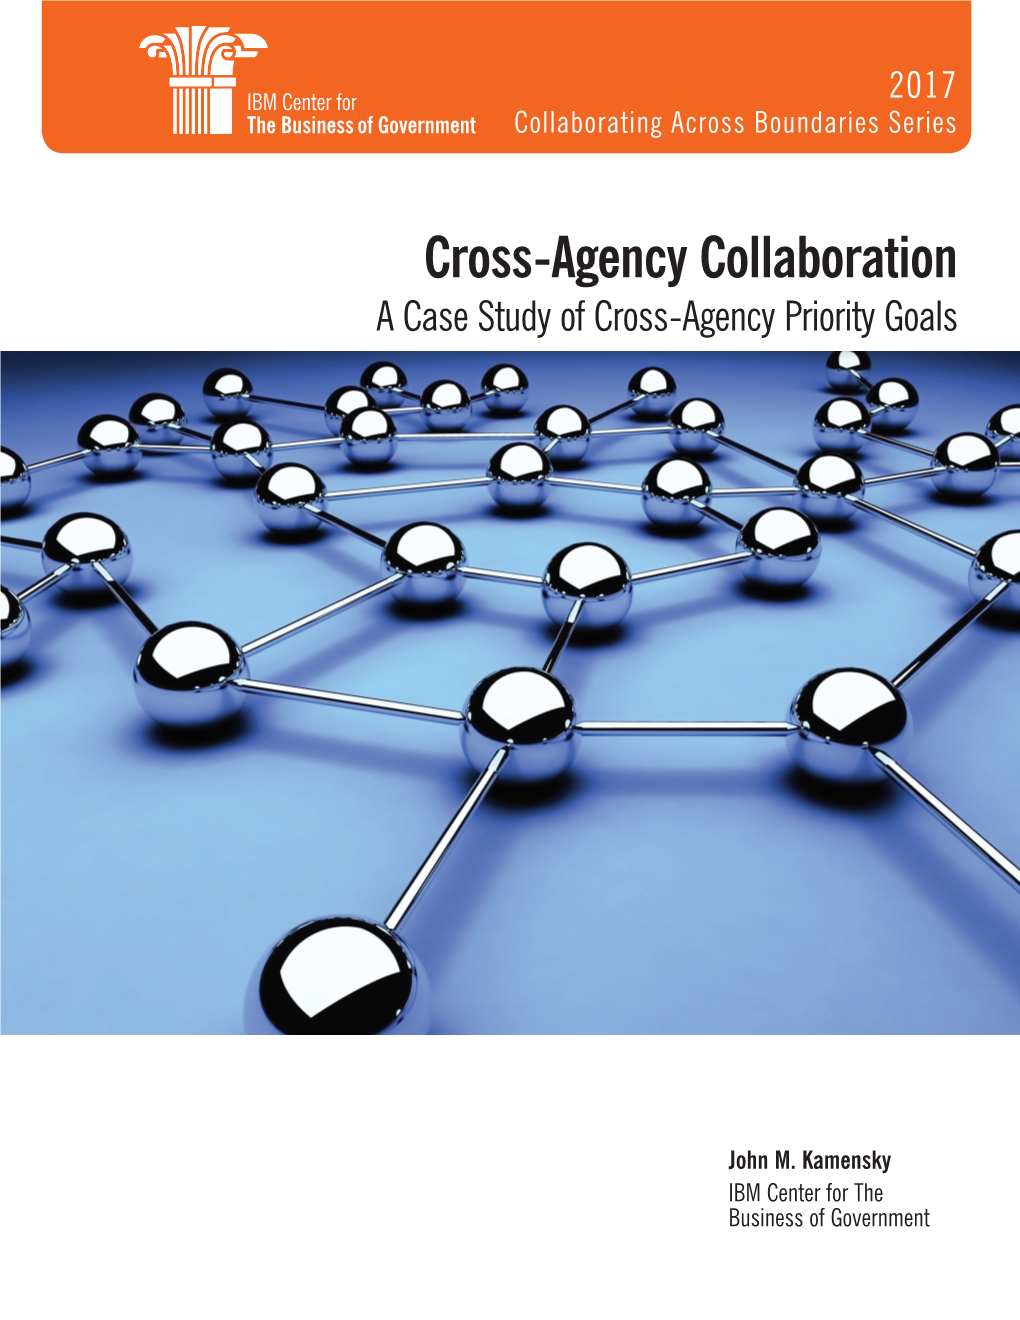 Cross-Agency Collaboration a Case Study of Cross-Agency Priority Goals